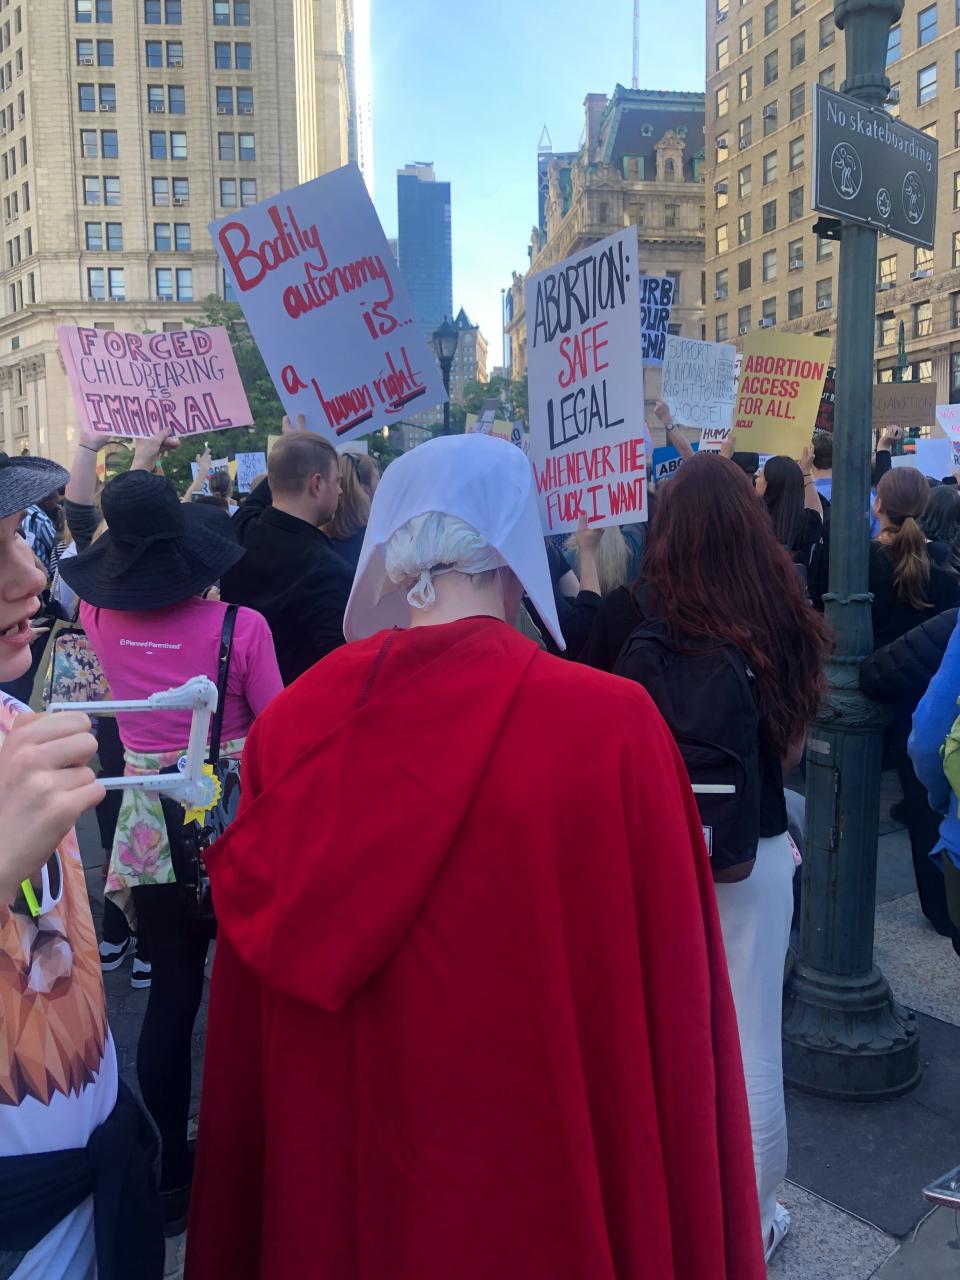 A protester dressed in a "Handmaid's Tale" outfit at the Foley Square #StopTheBans protest in New York City. (Photo: Emma Gray)